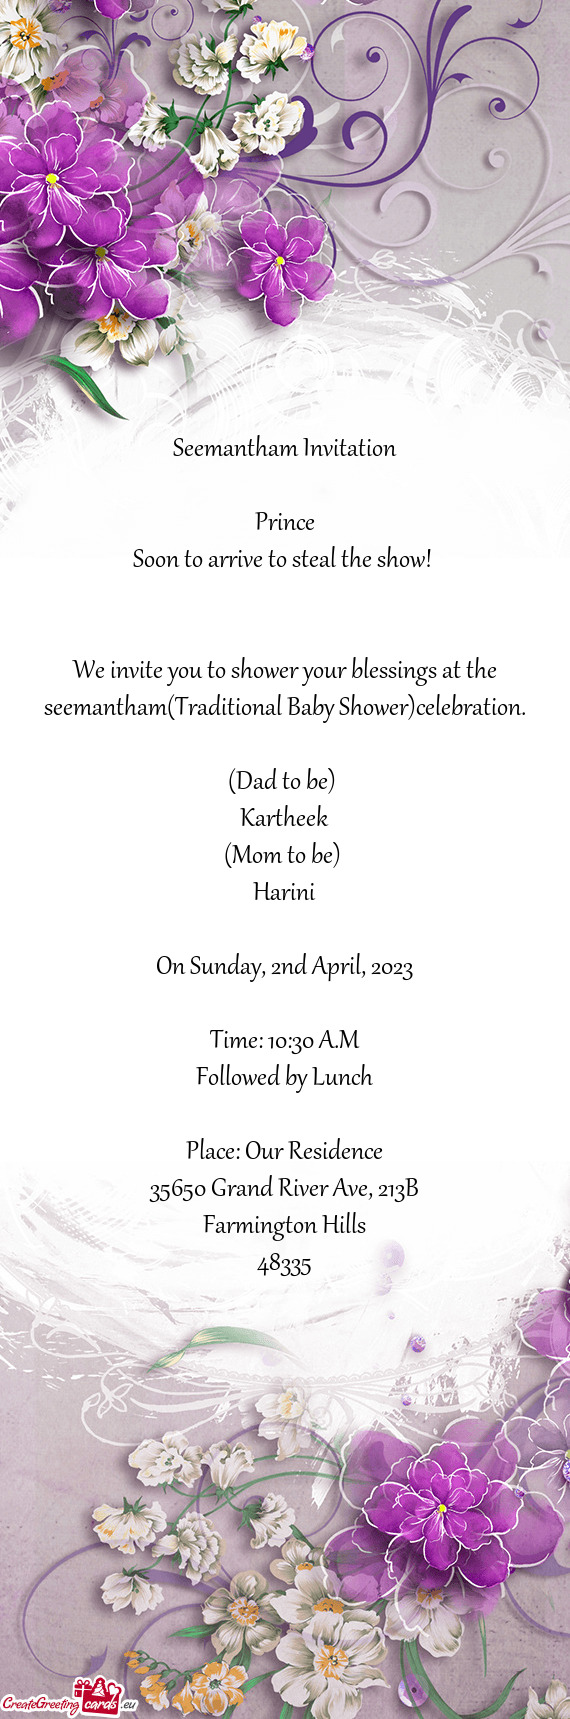 We invite you to shower your blessings at the seemantham(Traditional Baby Shower)celebration